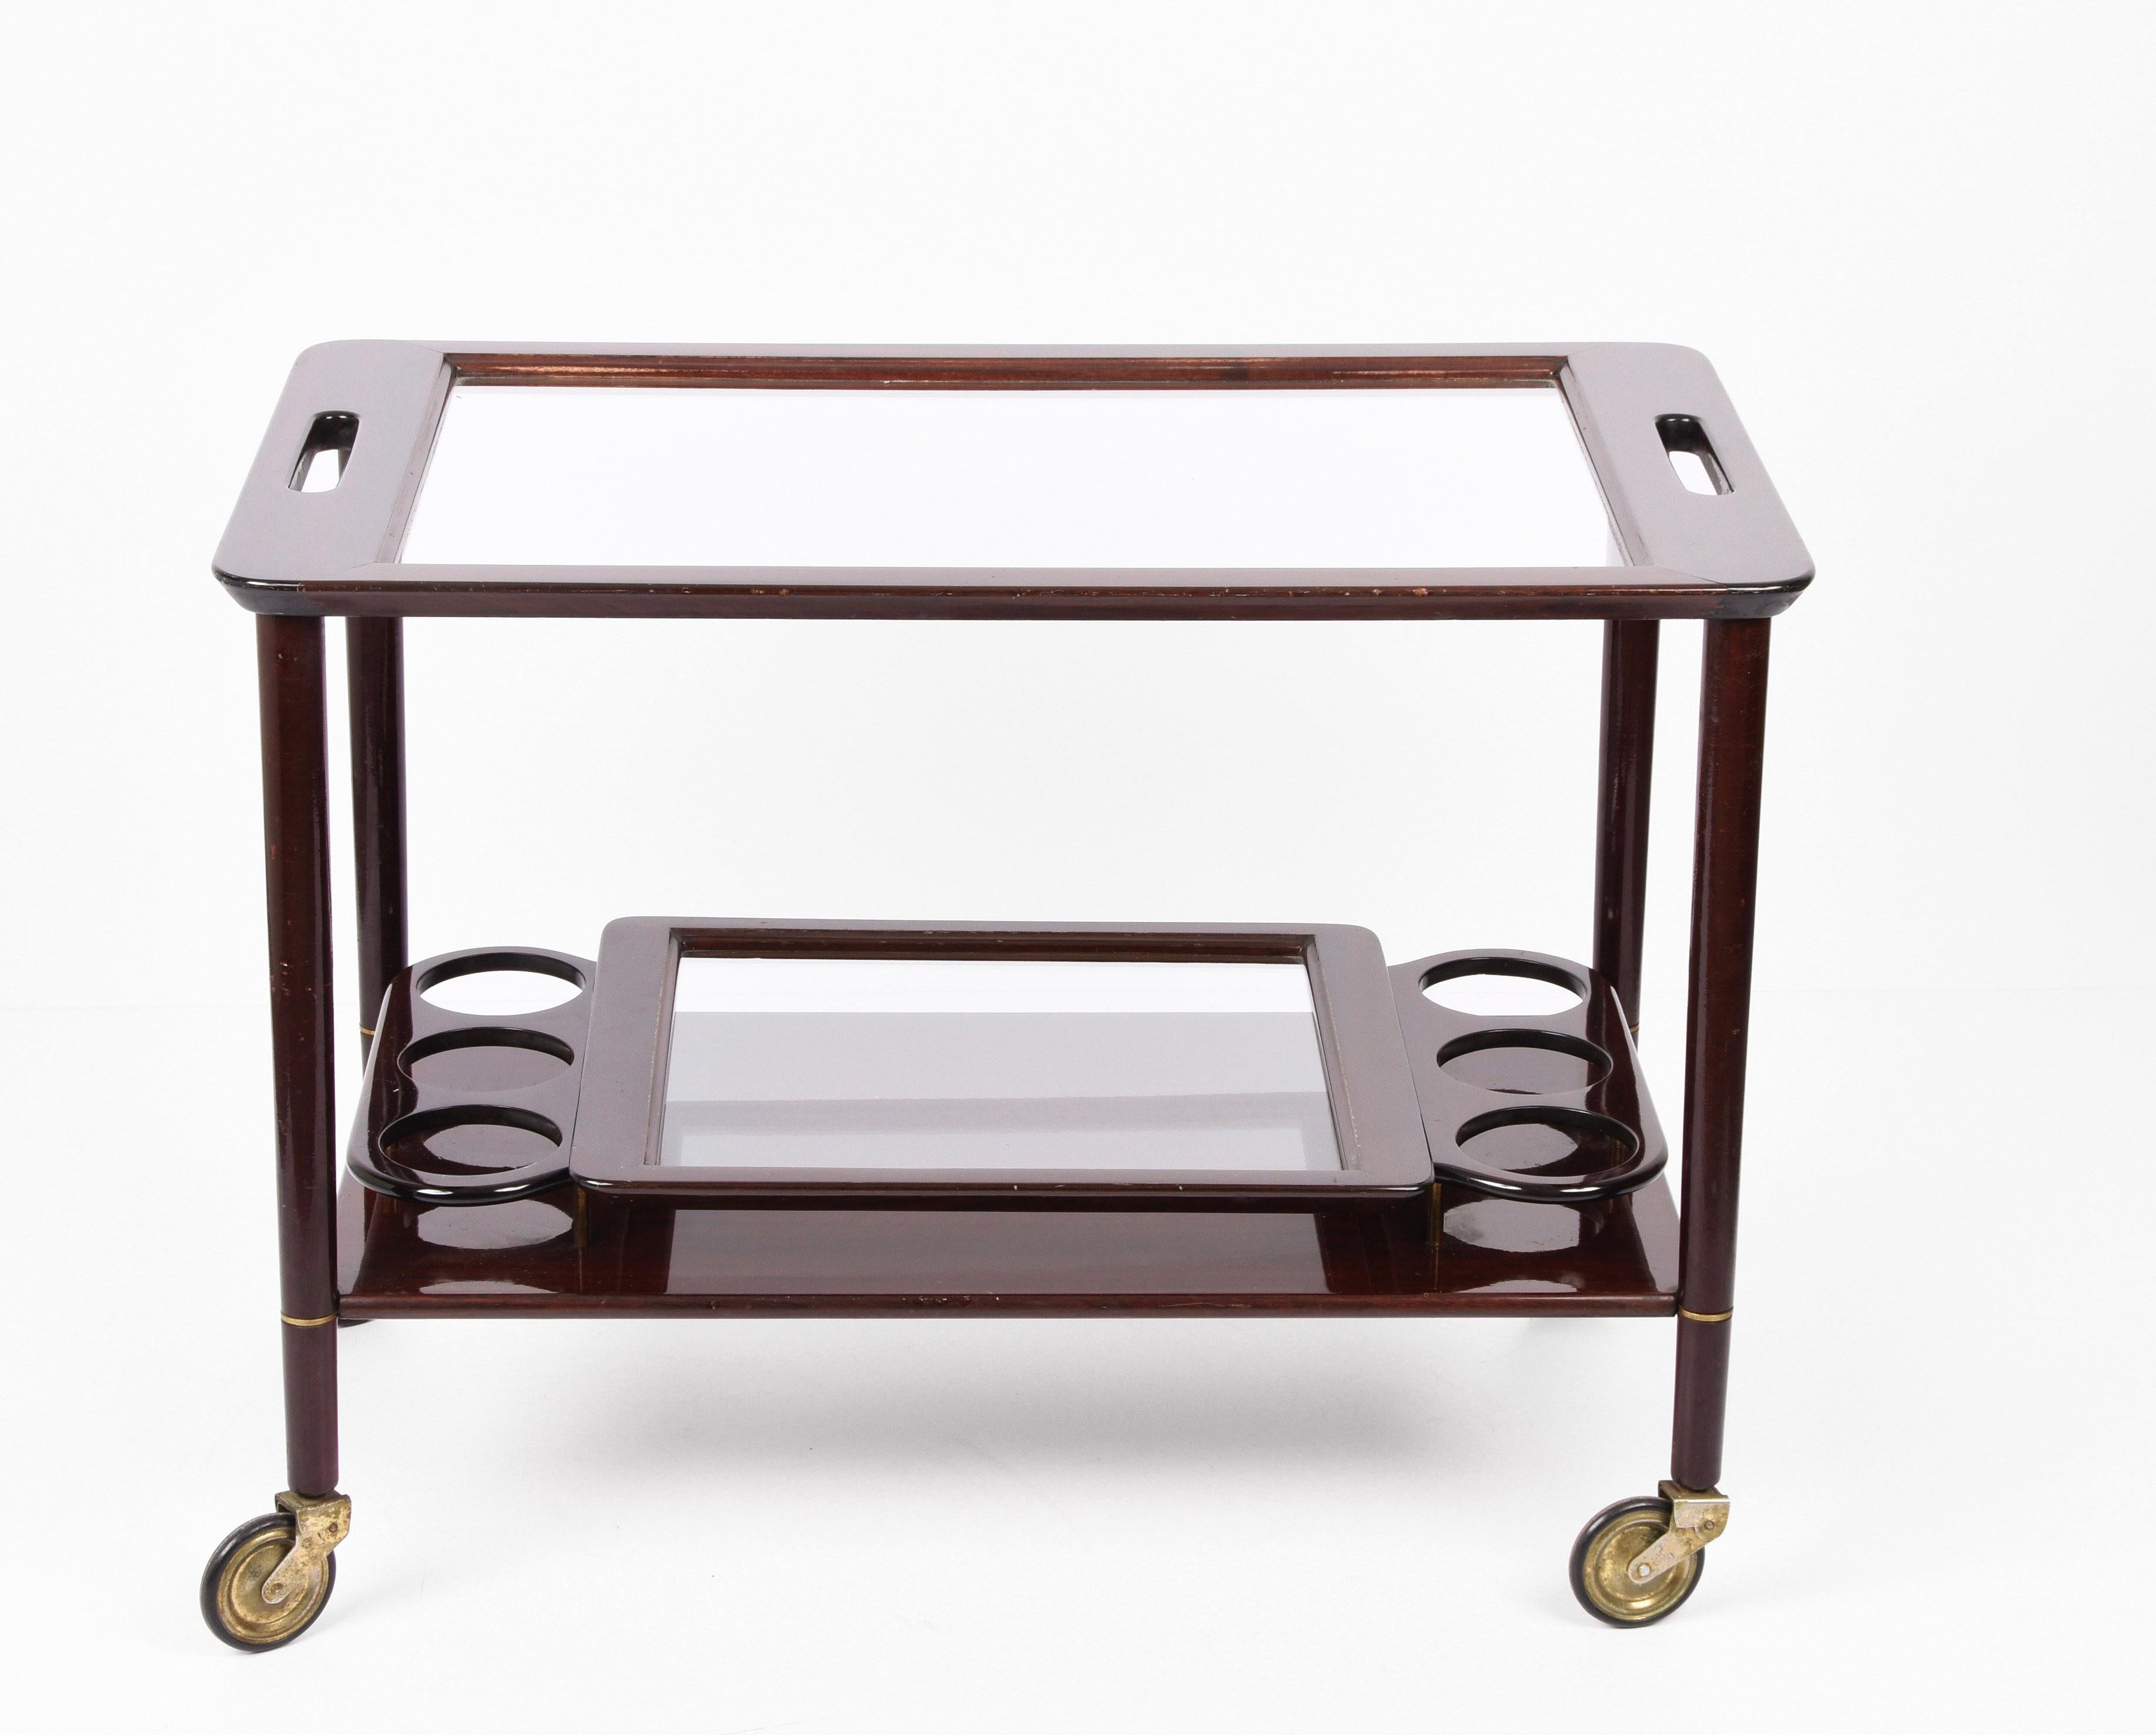 Fantastic midcentury wood bar cart with glass serving trays. This amazing piece is attributed to Cesare Lacca and it was designed in Italy during the 1950s.

This wonderful piece comes with a removable glass tray and has an ergonomic bottle holder,